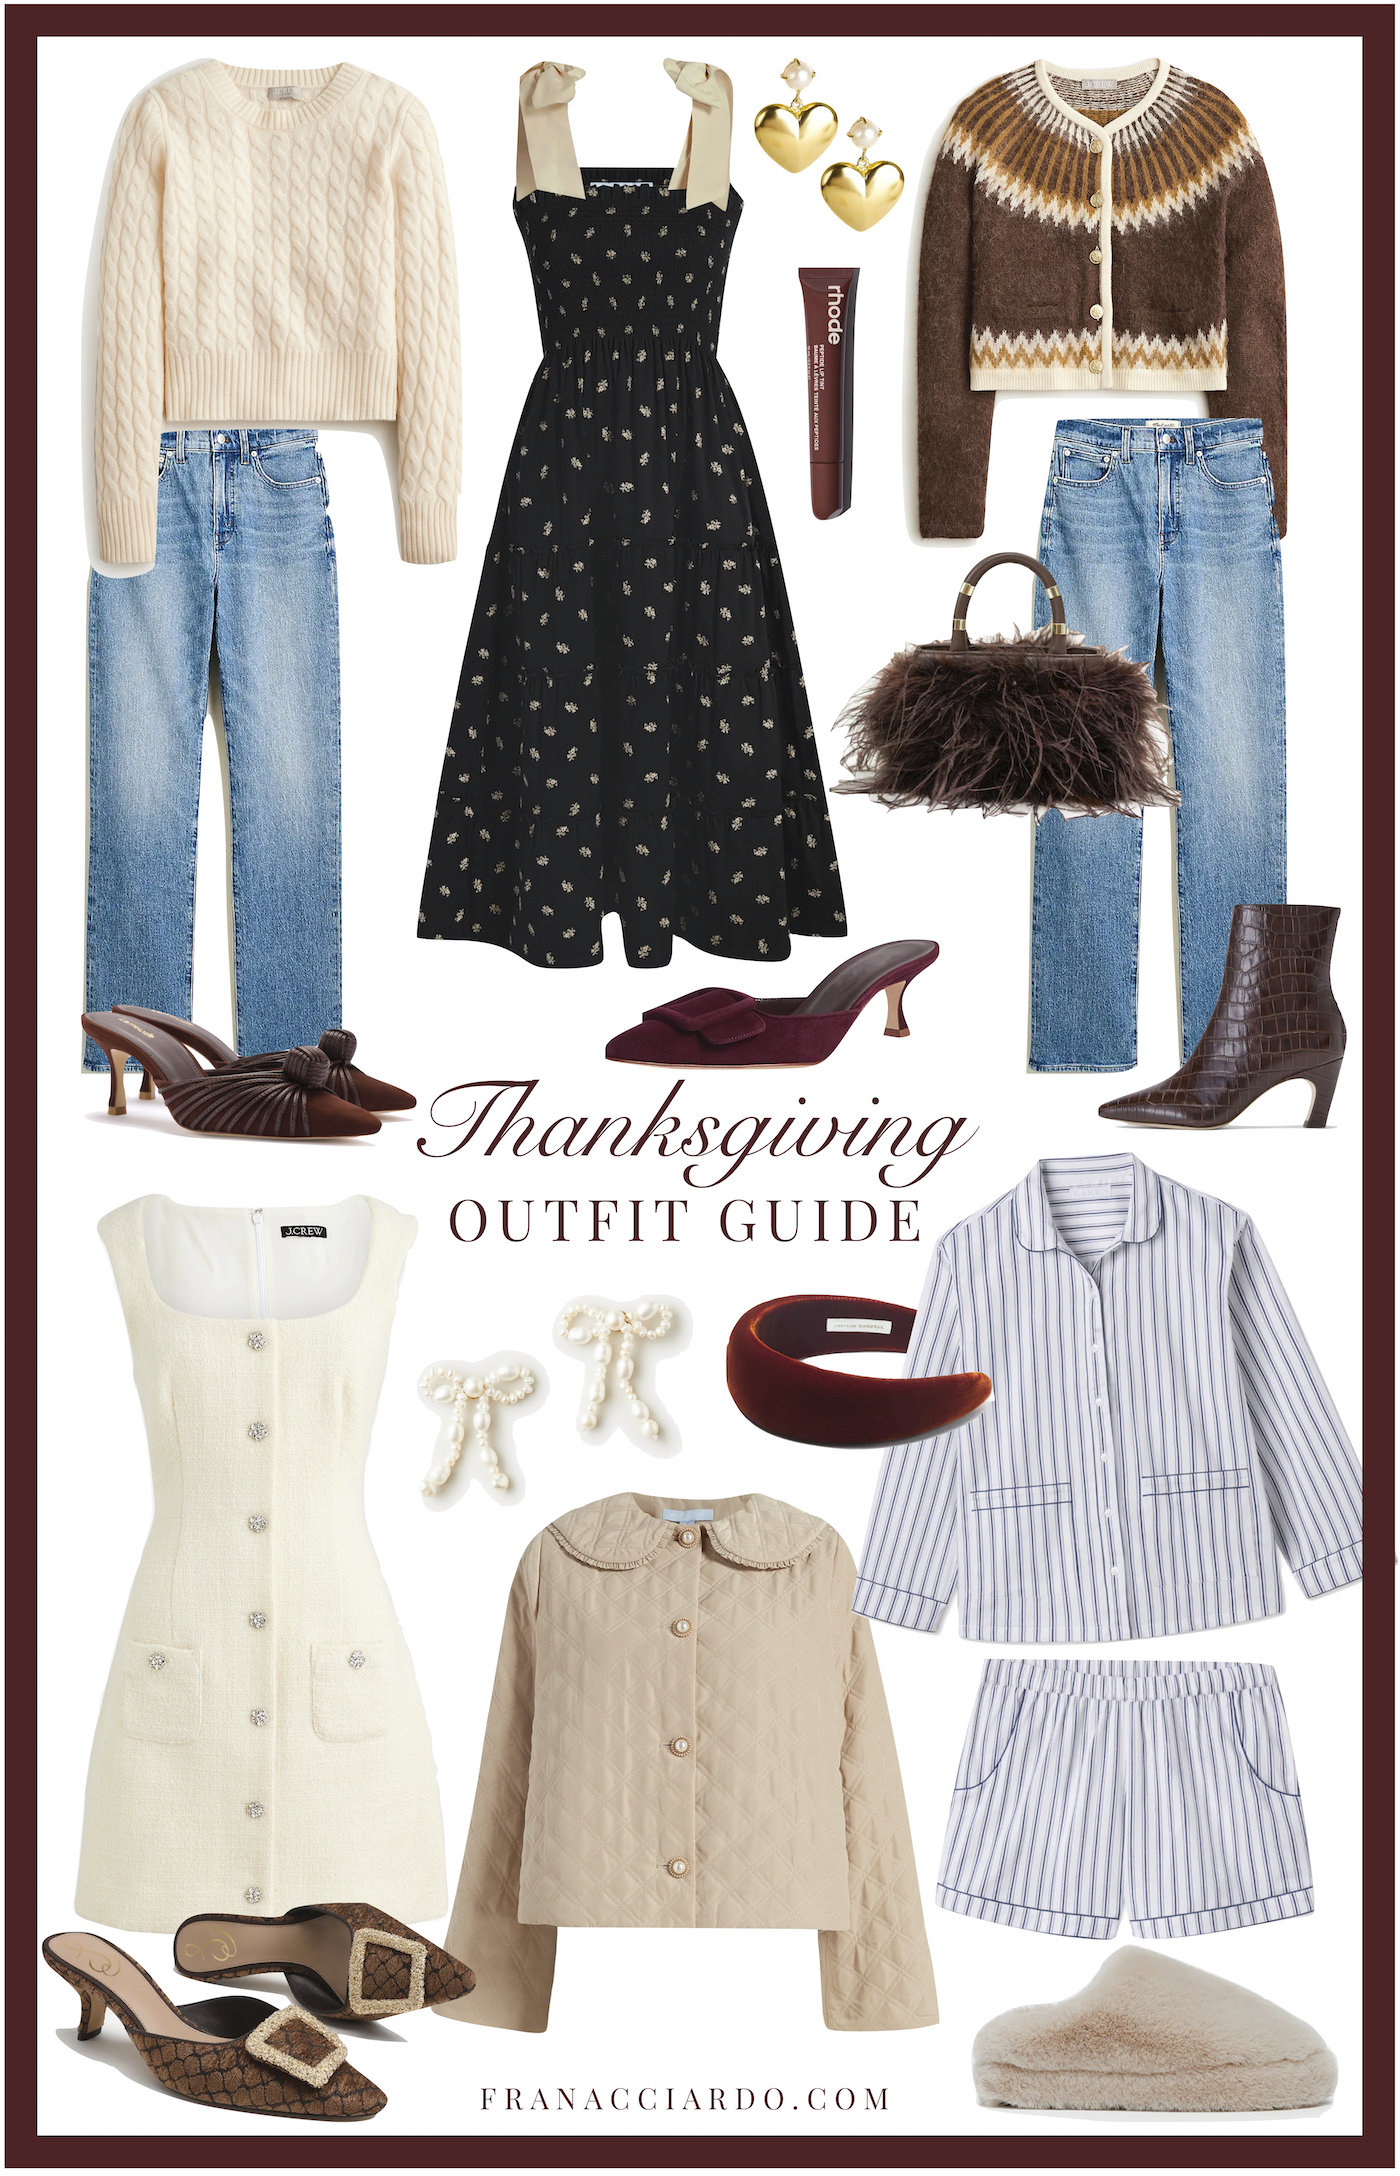 Thanksgiving Outfit Ideas Fran Acciardo Preppy Holiday Looks Holiday Party Outfit Guide